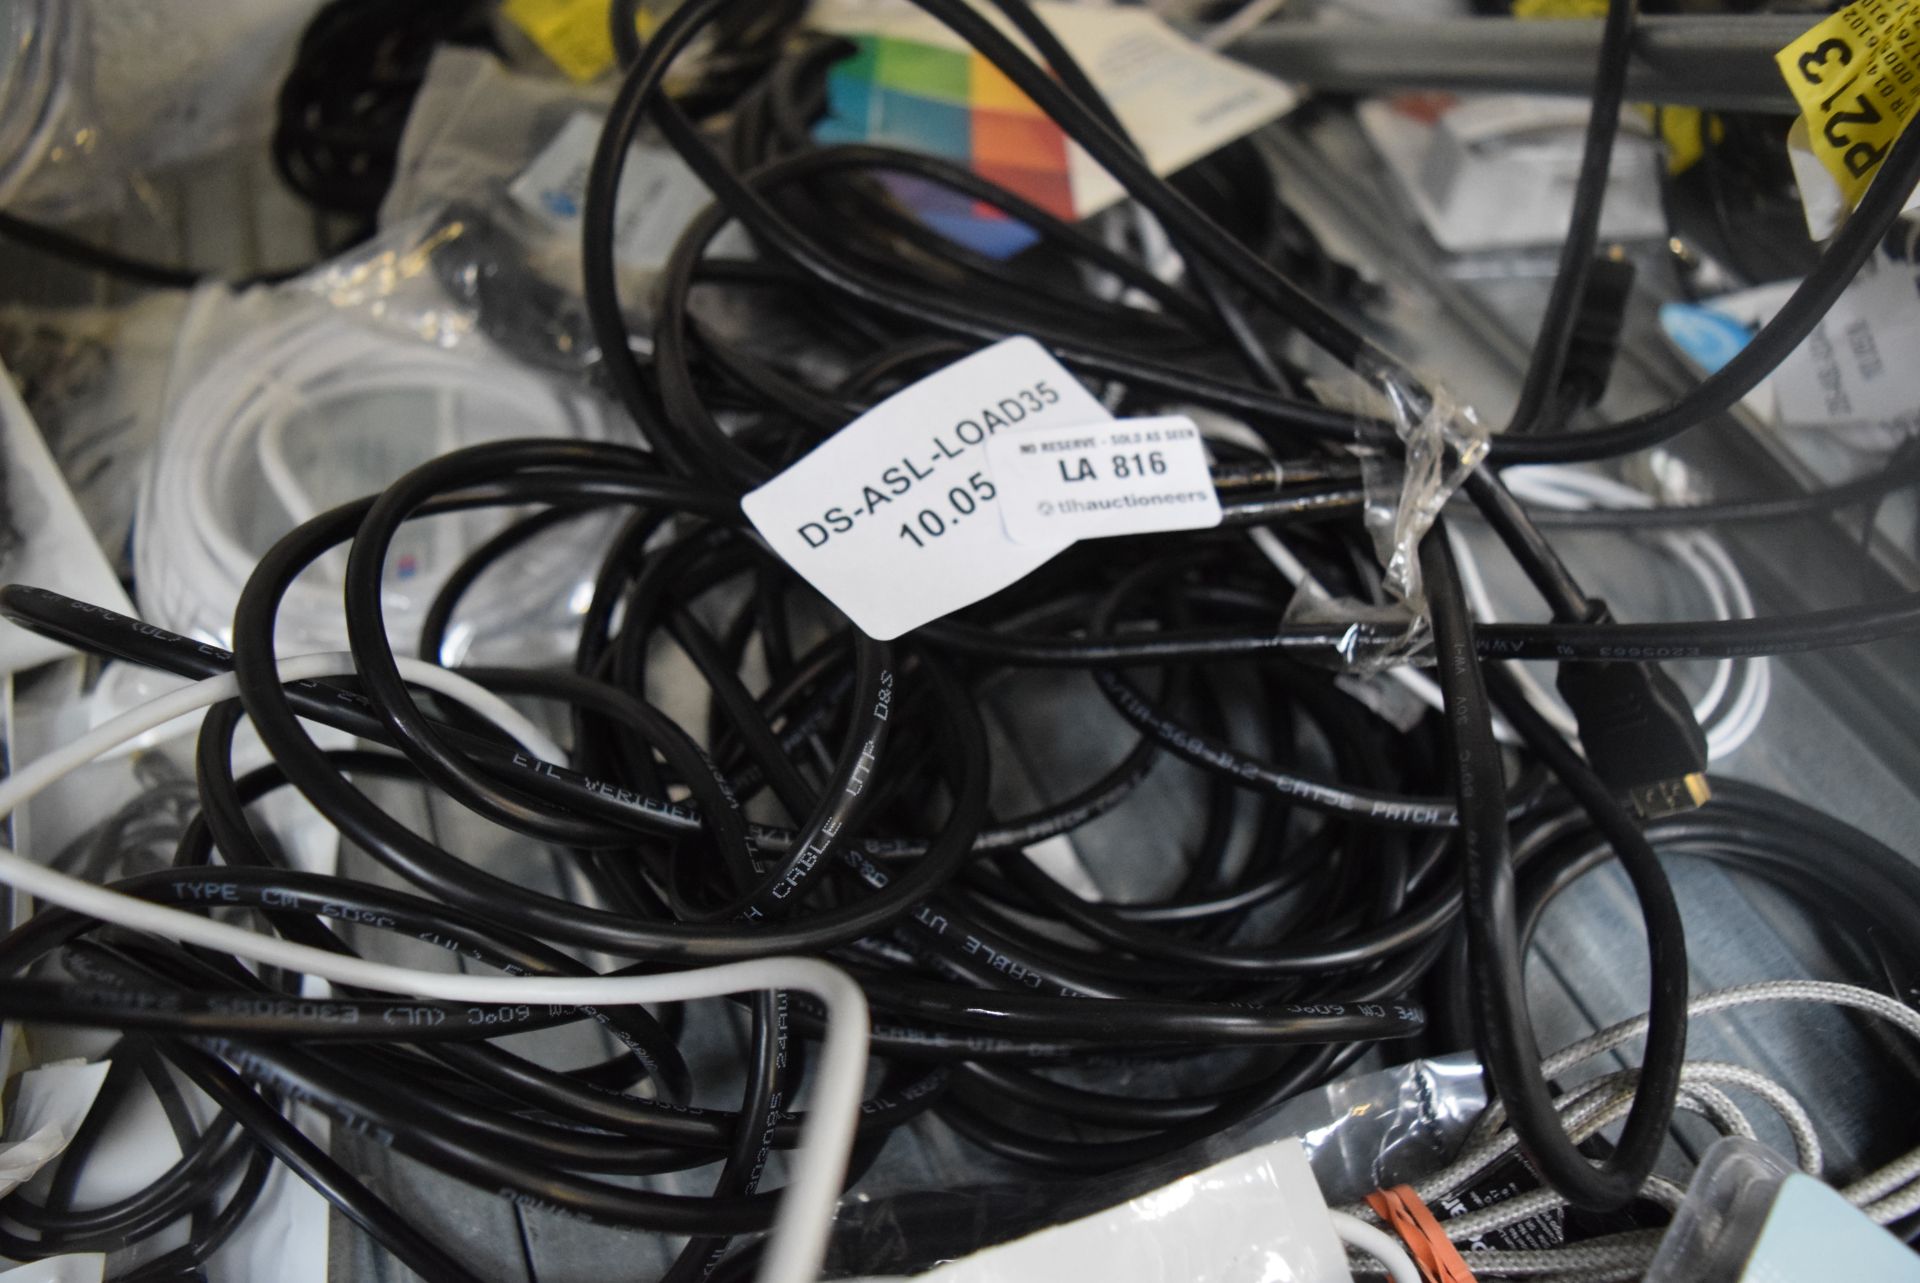 8 X ASSORTED CABLES HDMI AND OTHERS 15.05.18